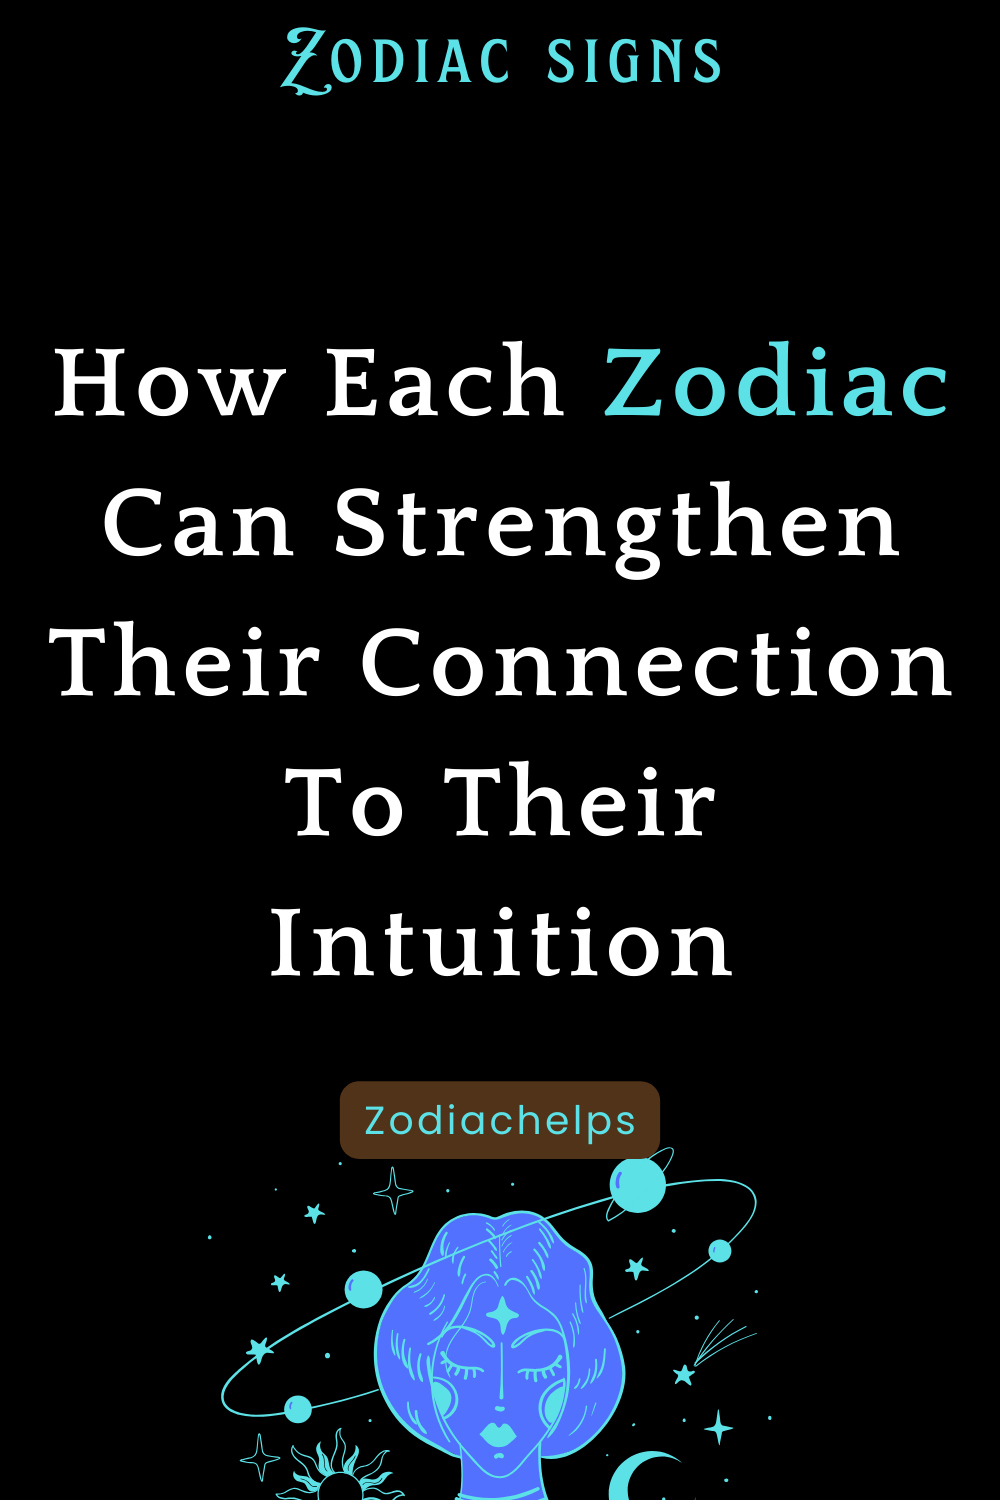 How Each Zodiac Can Strengthen Their Connection To Their Intuition